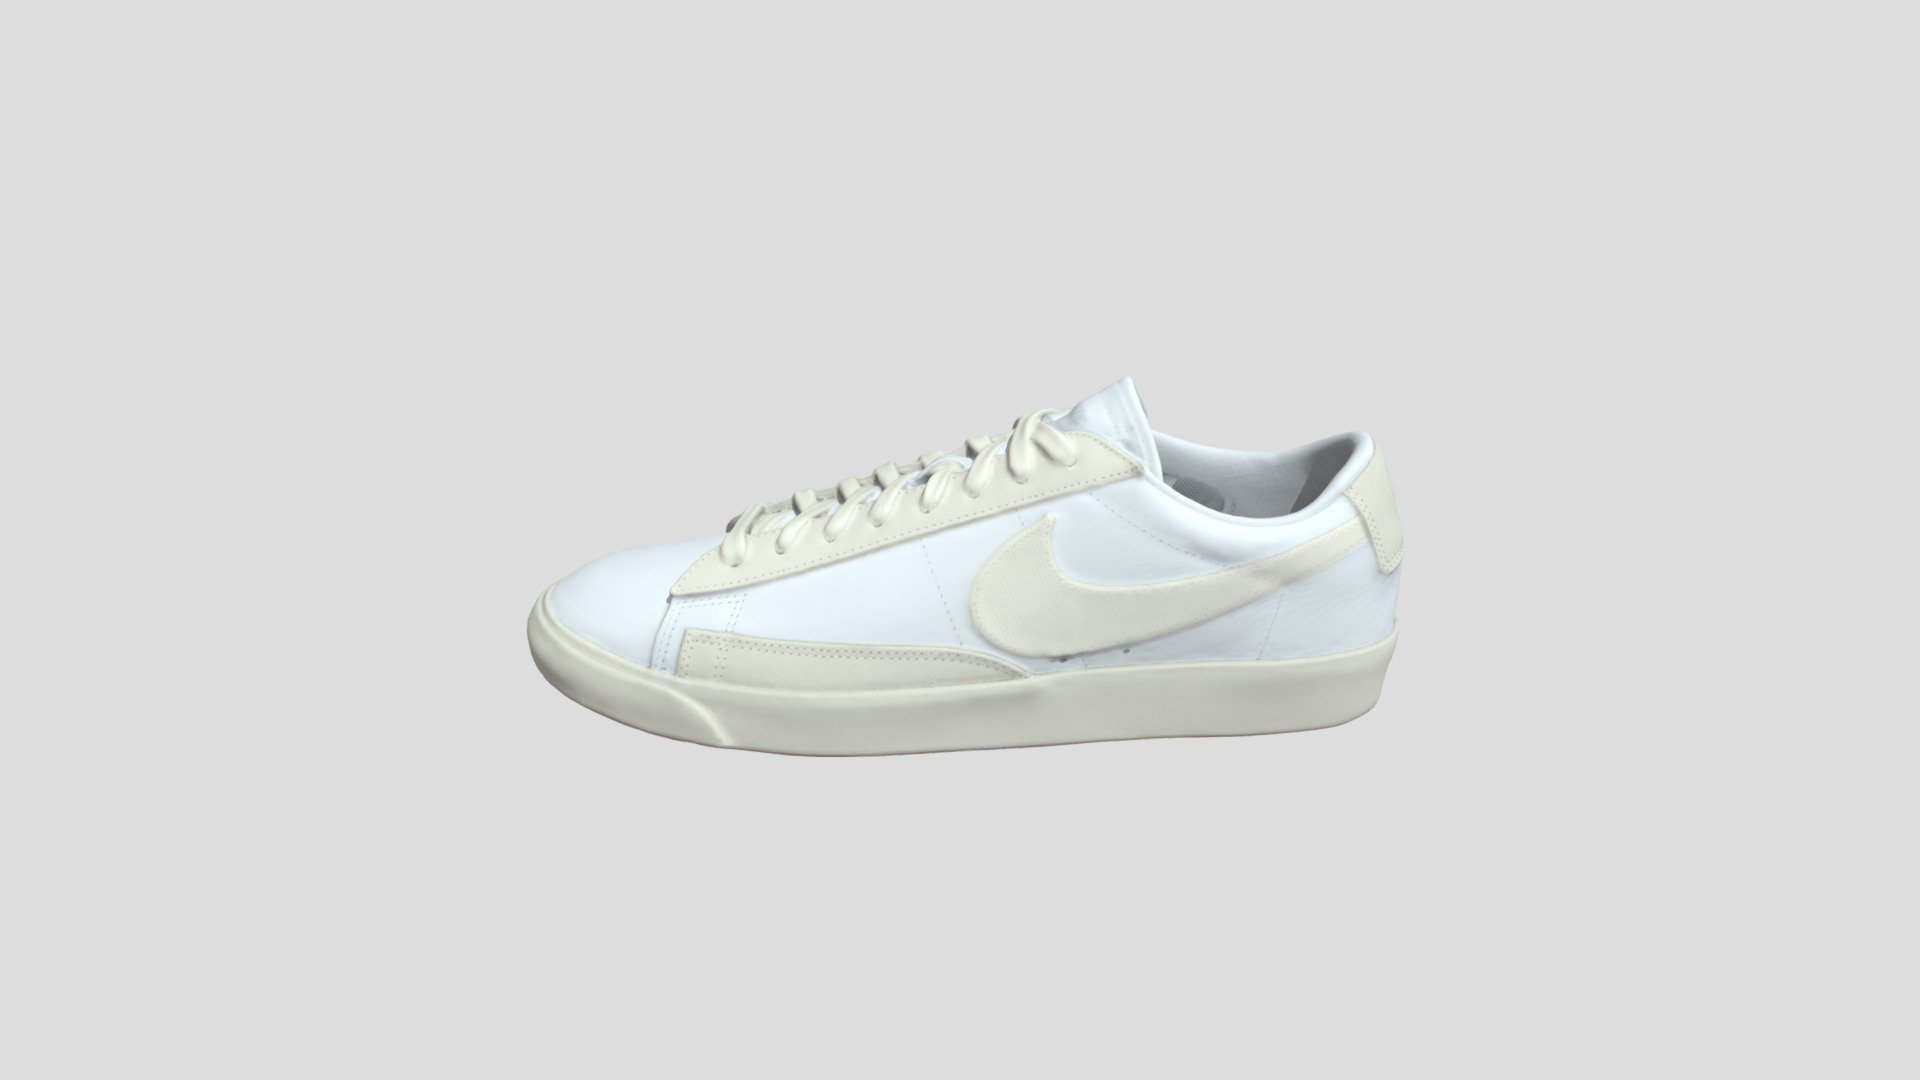 This model was created firstly by 3D scanning on retail version, and then being detail-improved manually, thus a 1:1 repulica of the original
PBR ready
Low-poly
4K texture
Welcome to check out other models we have to offer. And we do accept custom orders as well :) - Nike Blazer Low leather 白色_cw7585-100 - Buy Royalty Free 3D model by TRARGUS 3d model